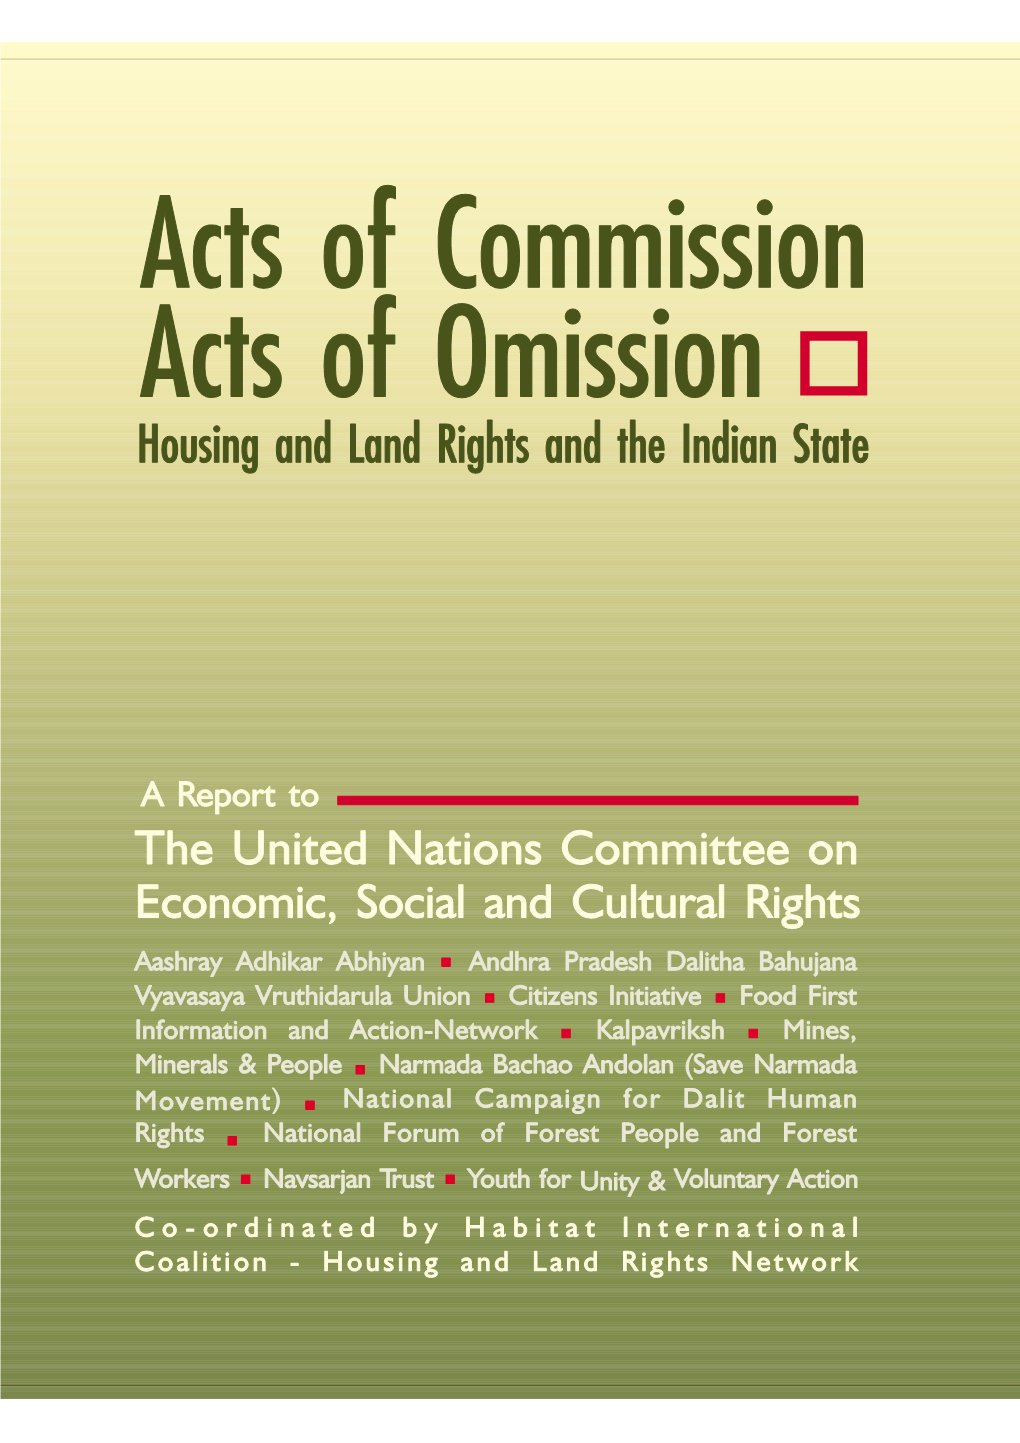 Acts of Commission, Acts of Omission: Housing and Land Rights